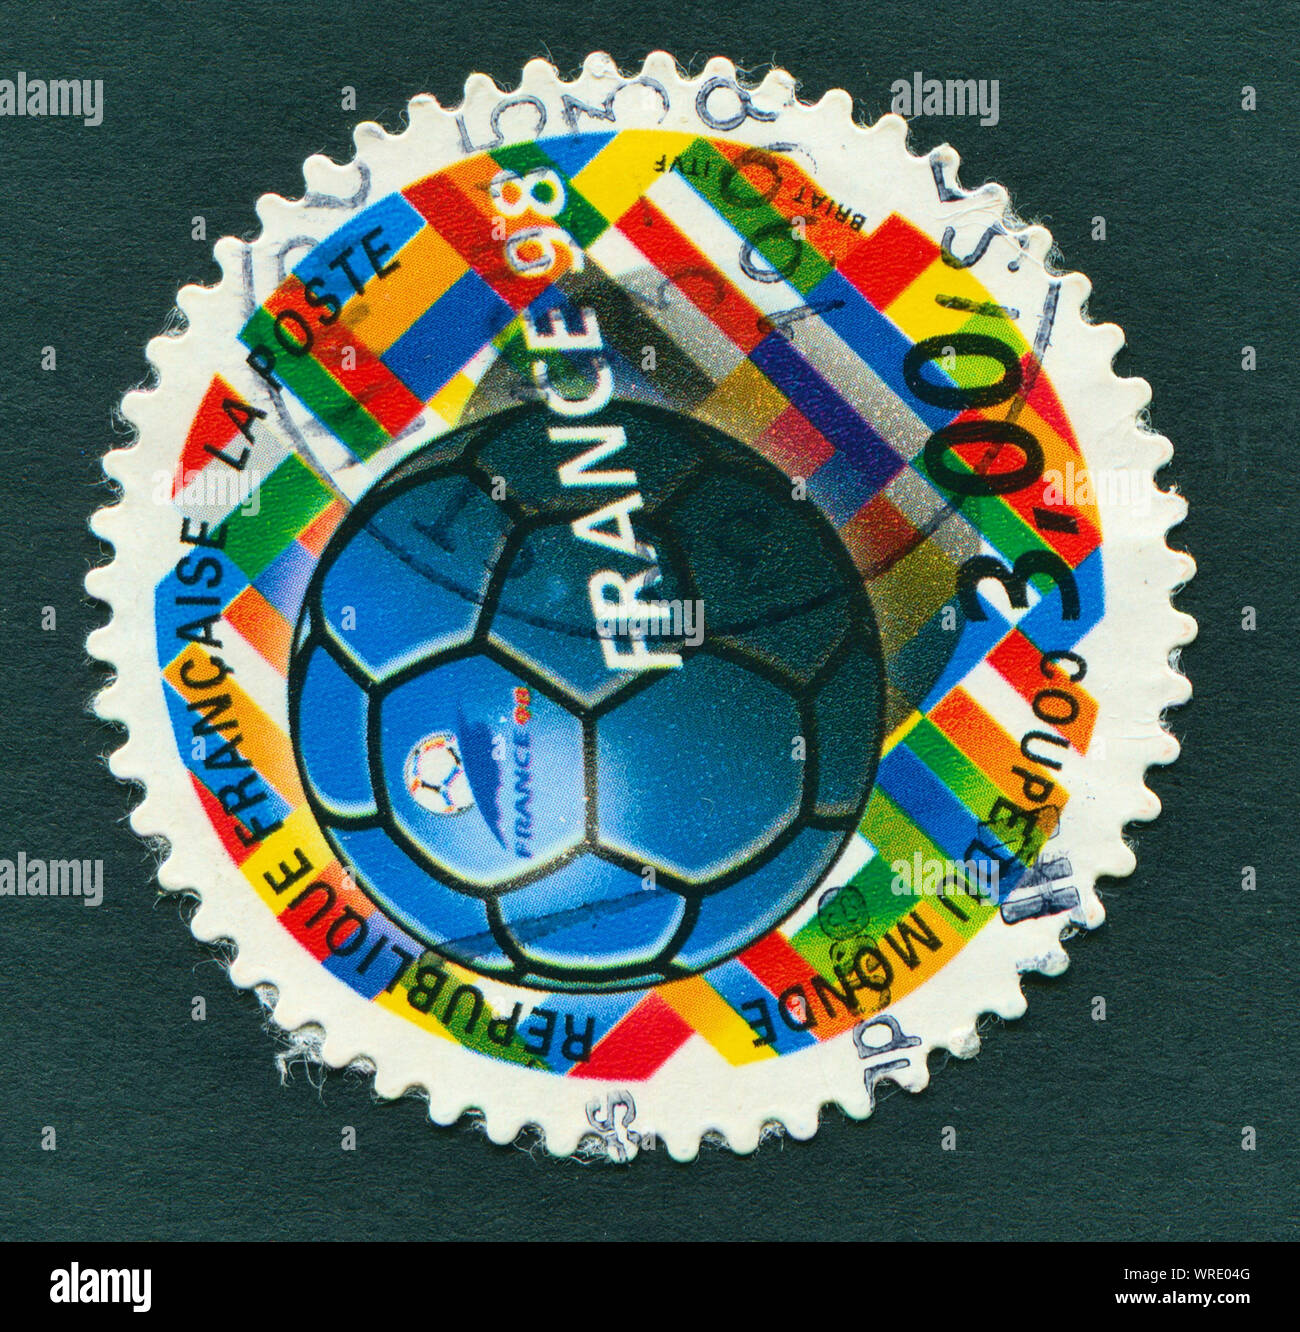 FIFA WORLD CUP 1998 in France - a stamp showing football. Stock Photo